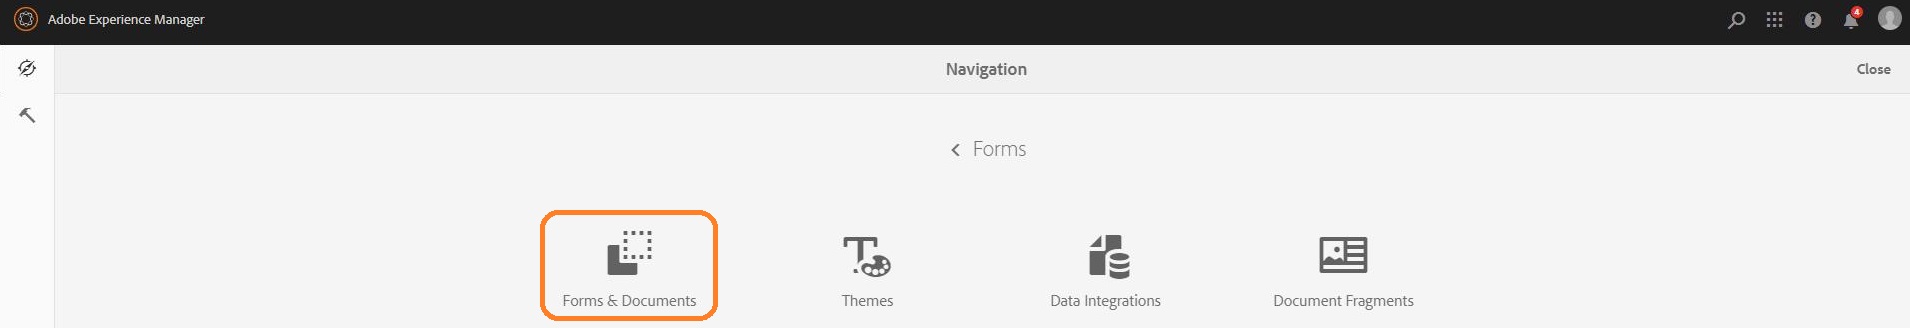 Navigate to Forms & Documents